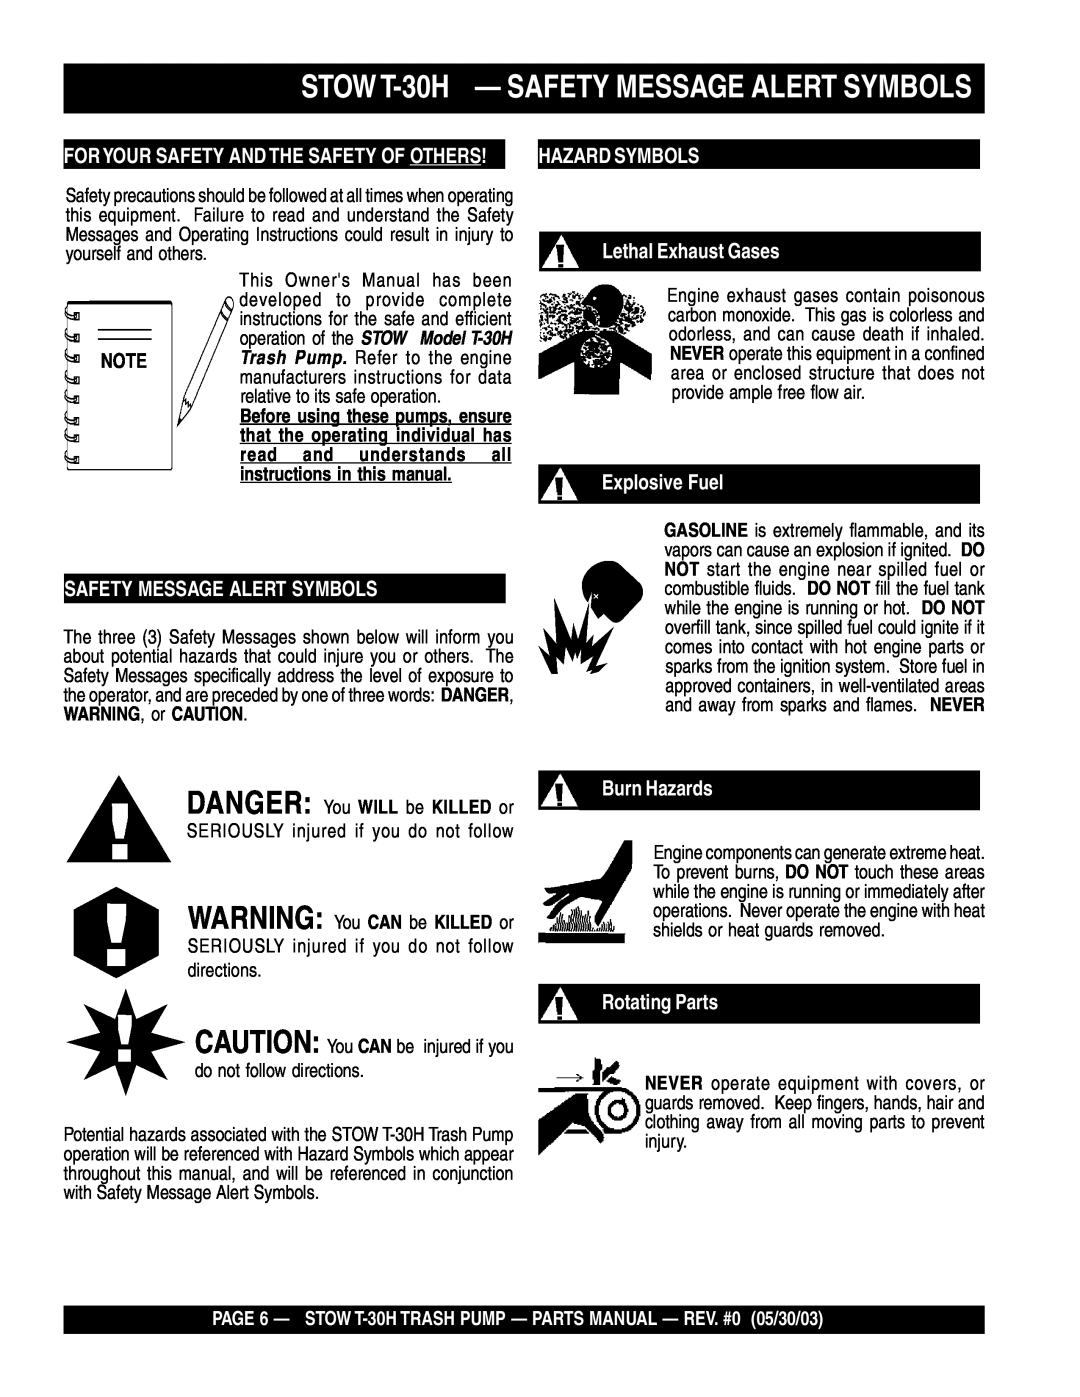 Stow manual STOW T-30H- SAFETY MESSAGE ALERT SYMBOLS, Hazard Symbols, Safety Message Alert Symbols, Lethal Exhaust Gases 